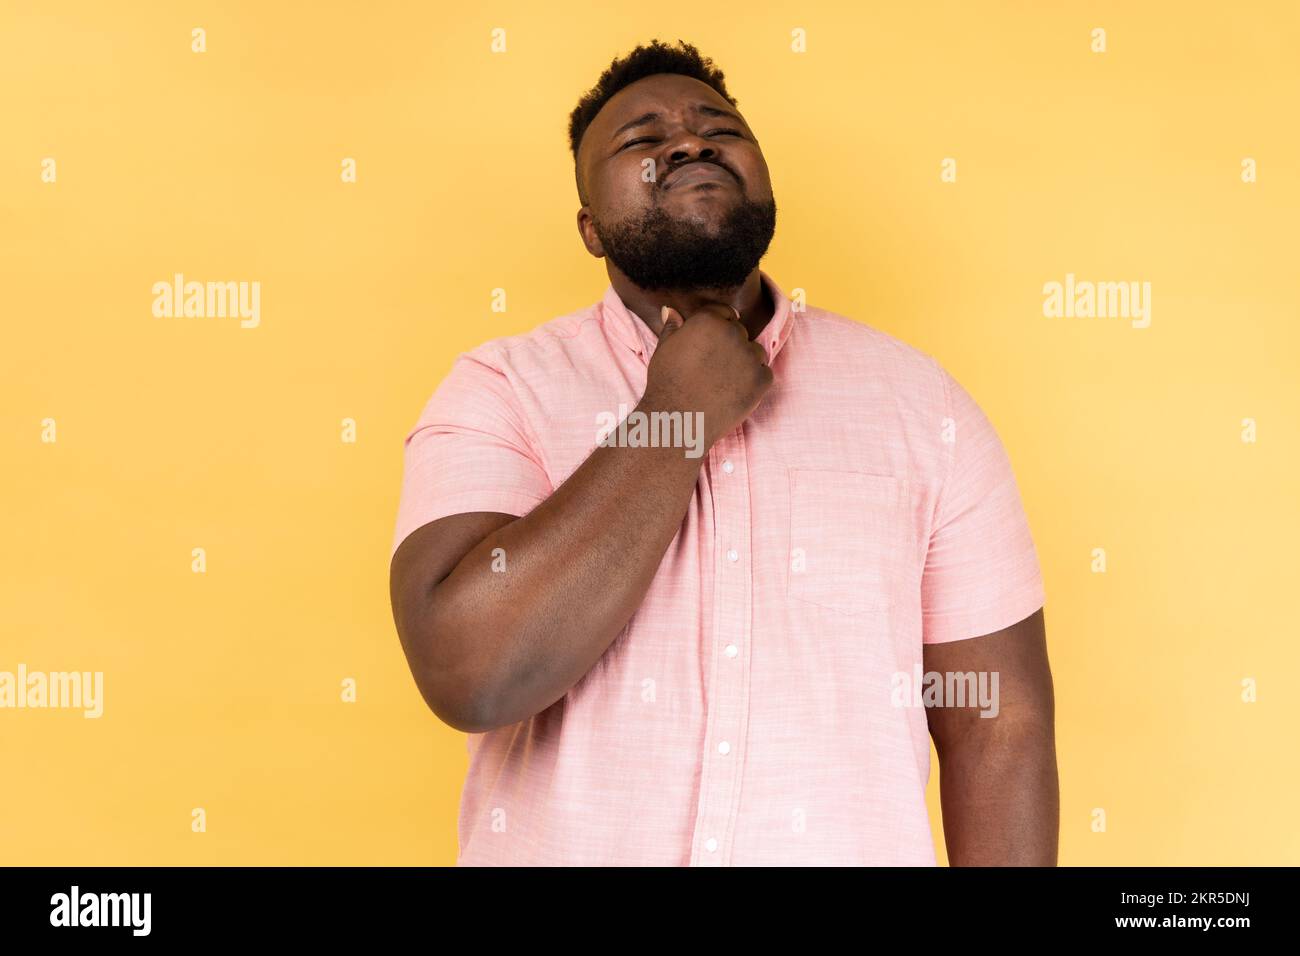 Throat pain. Portrait of sick man wearing pink shirt standing and touching his painful throat, frowning his face, feels terrible pain. Indoor studio shot isolated on yellow background. Stock Photo